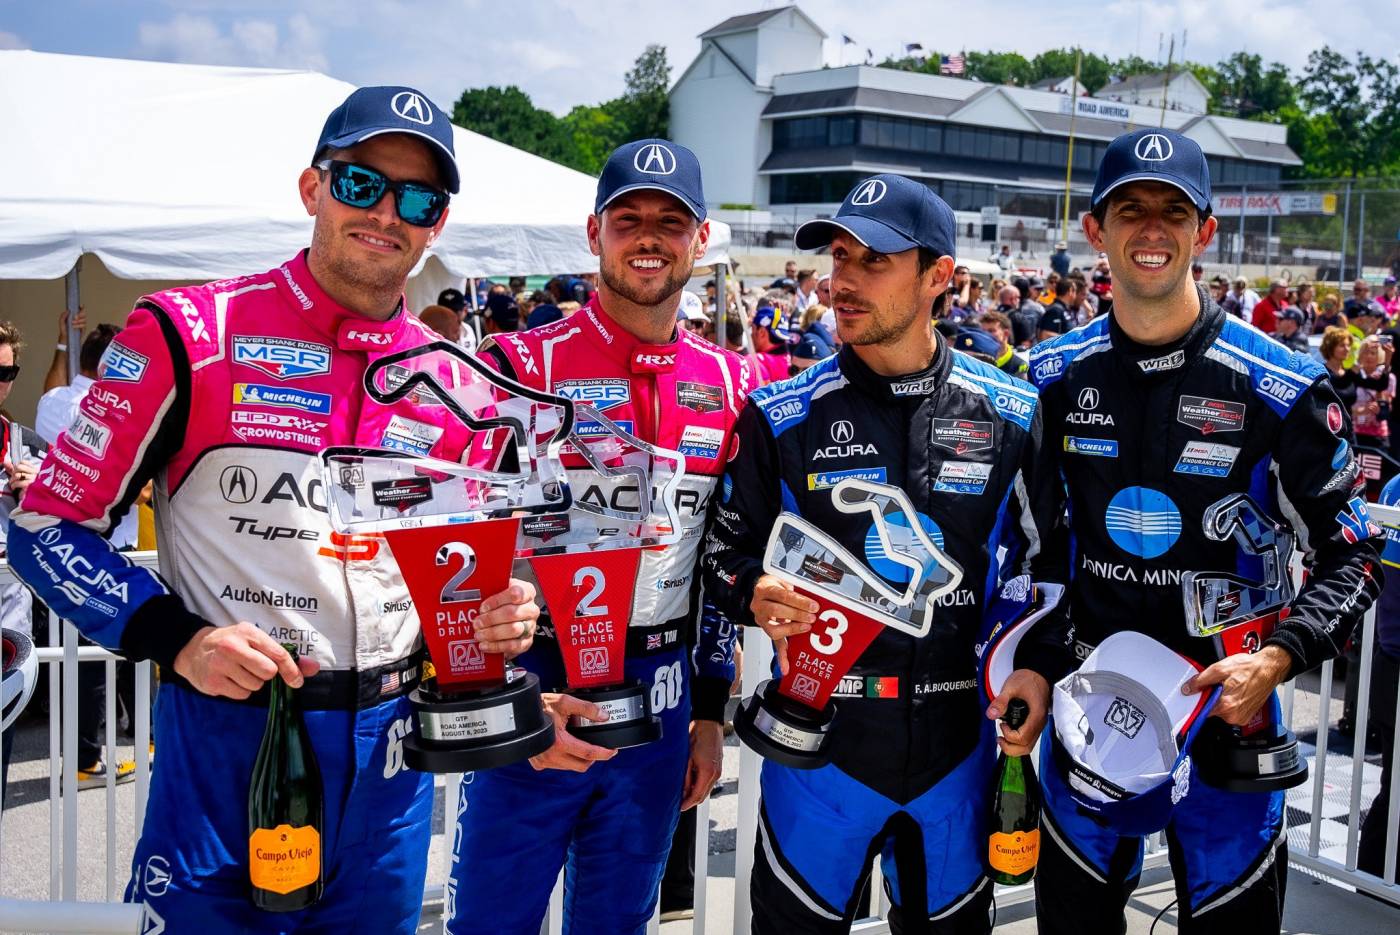 Double podium for Acura and victory for PR1 Motorsports at Road America